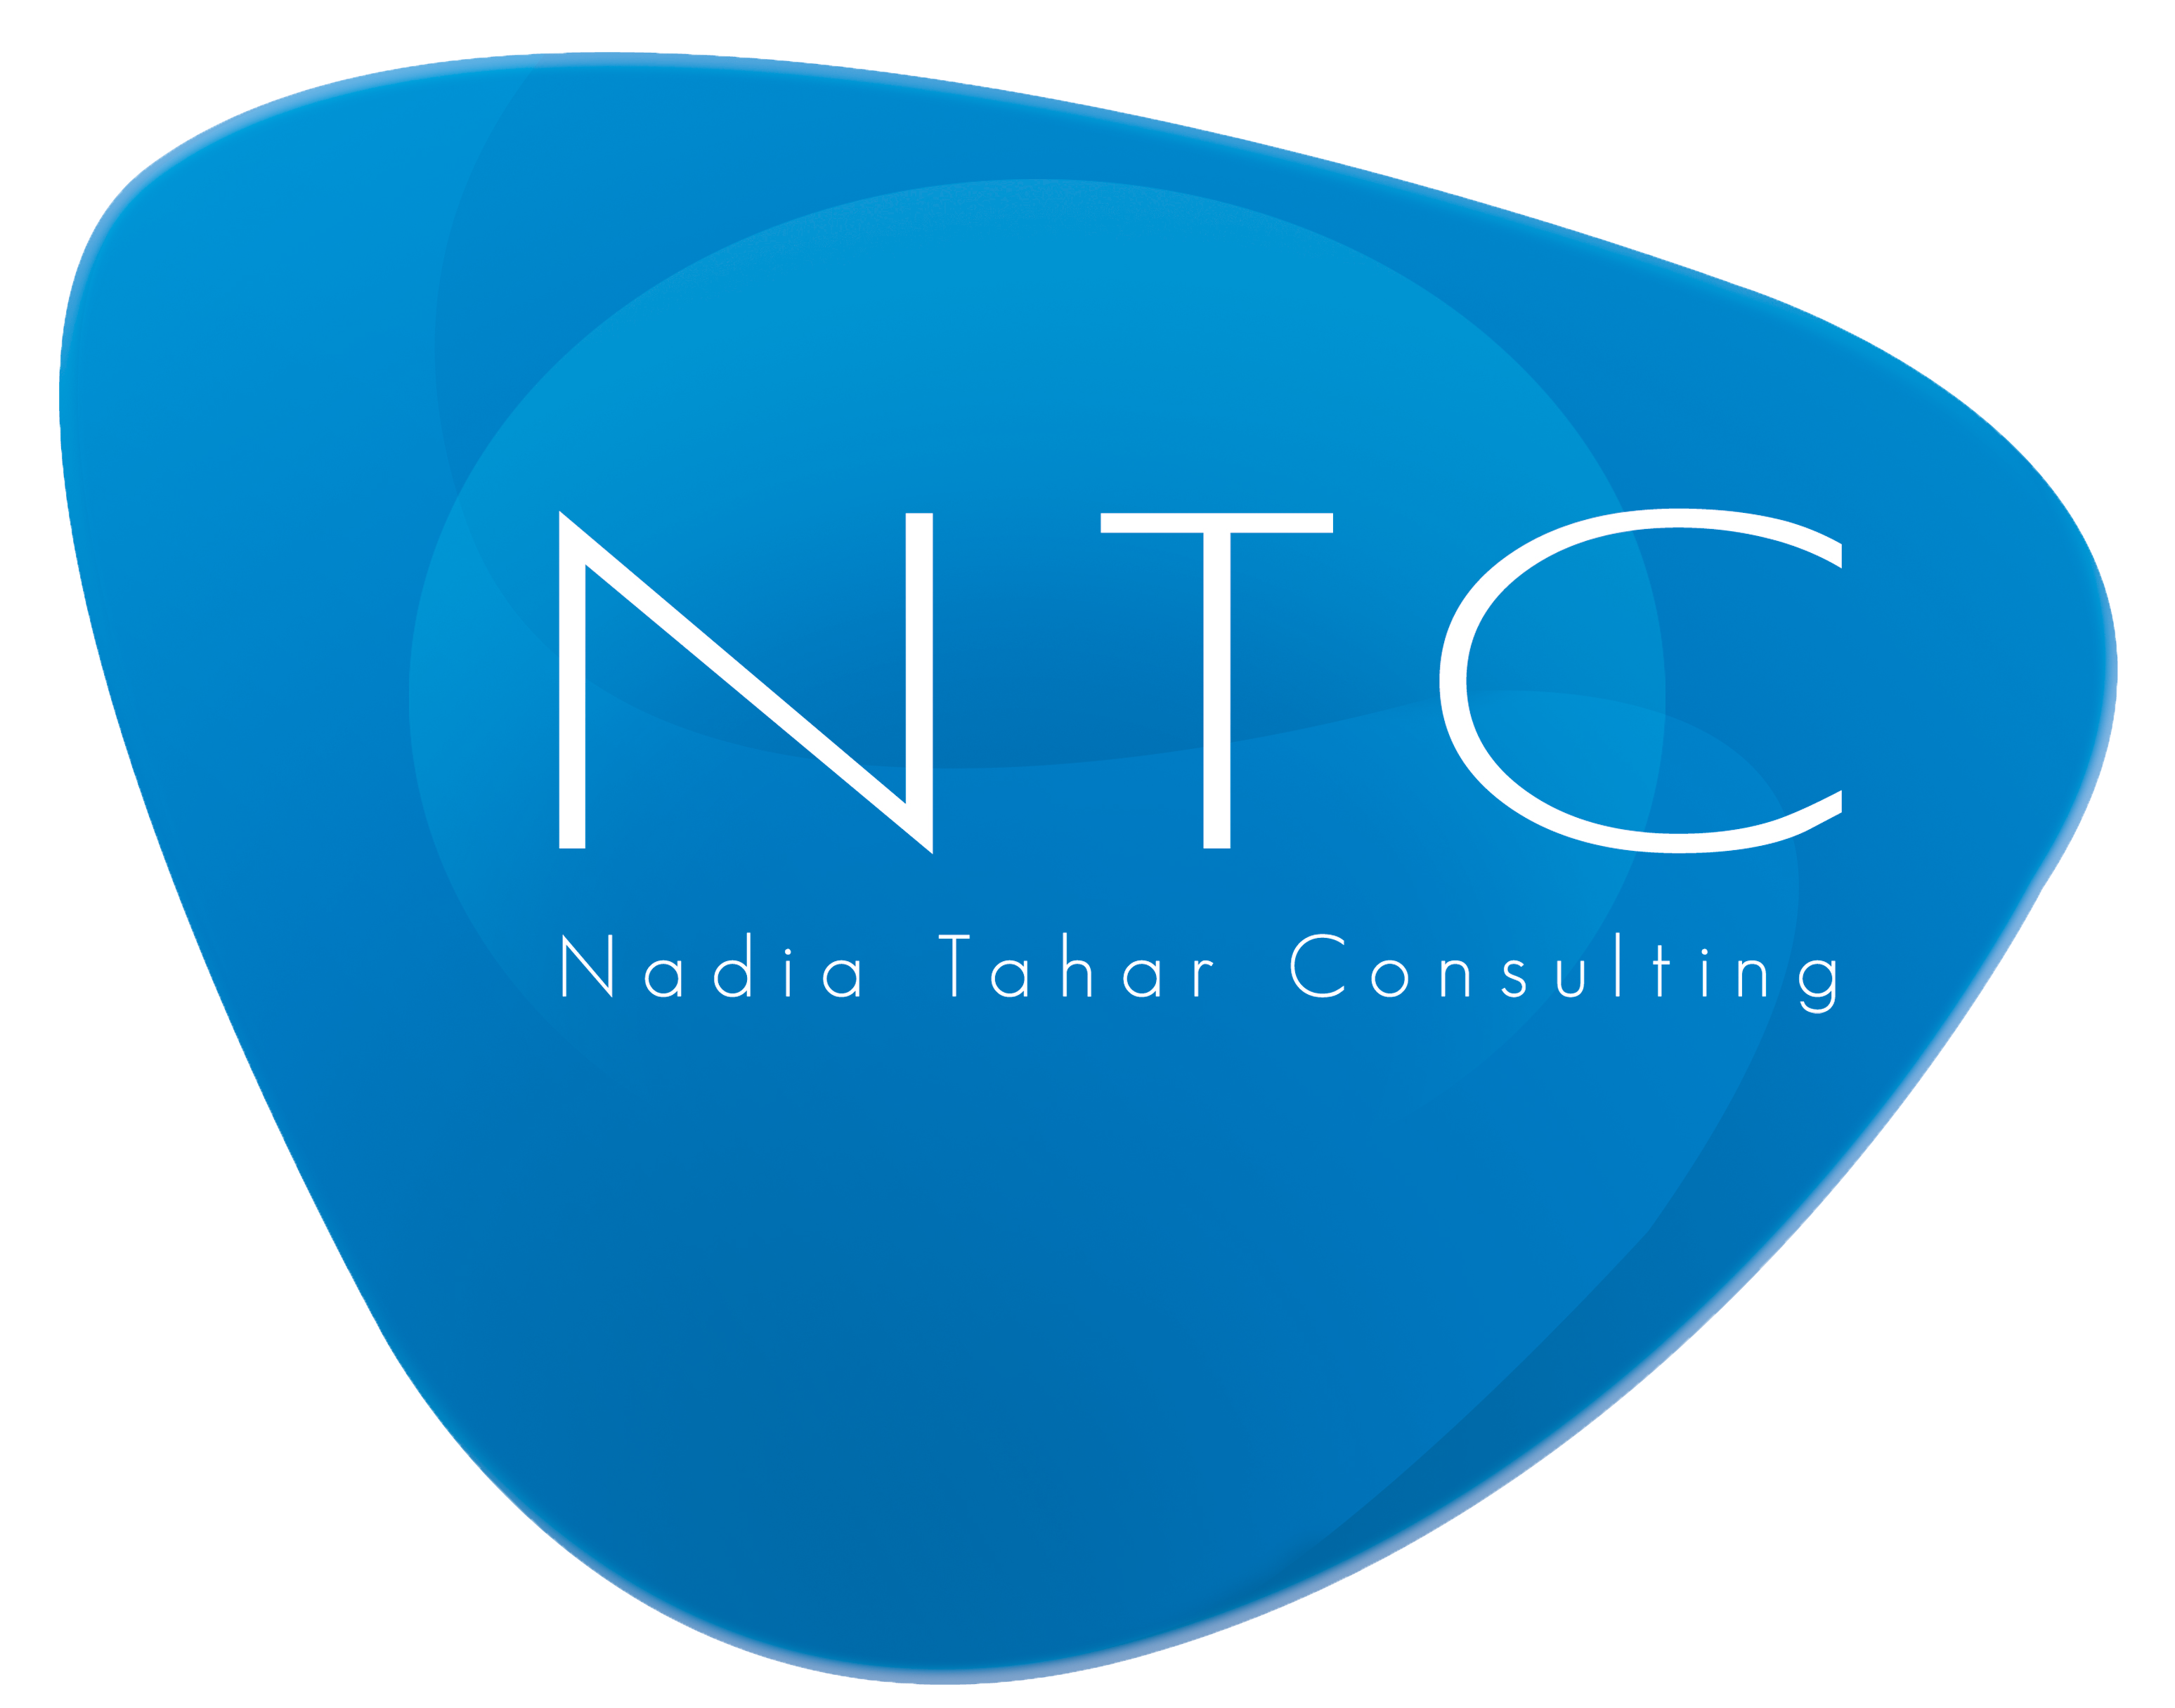 NT Consulting